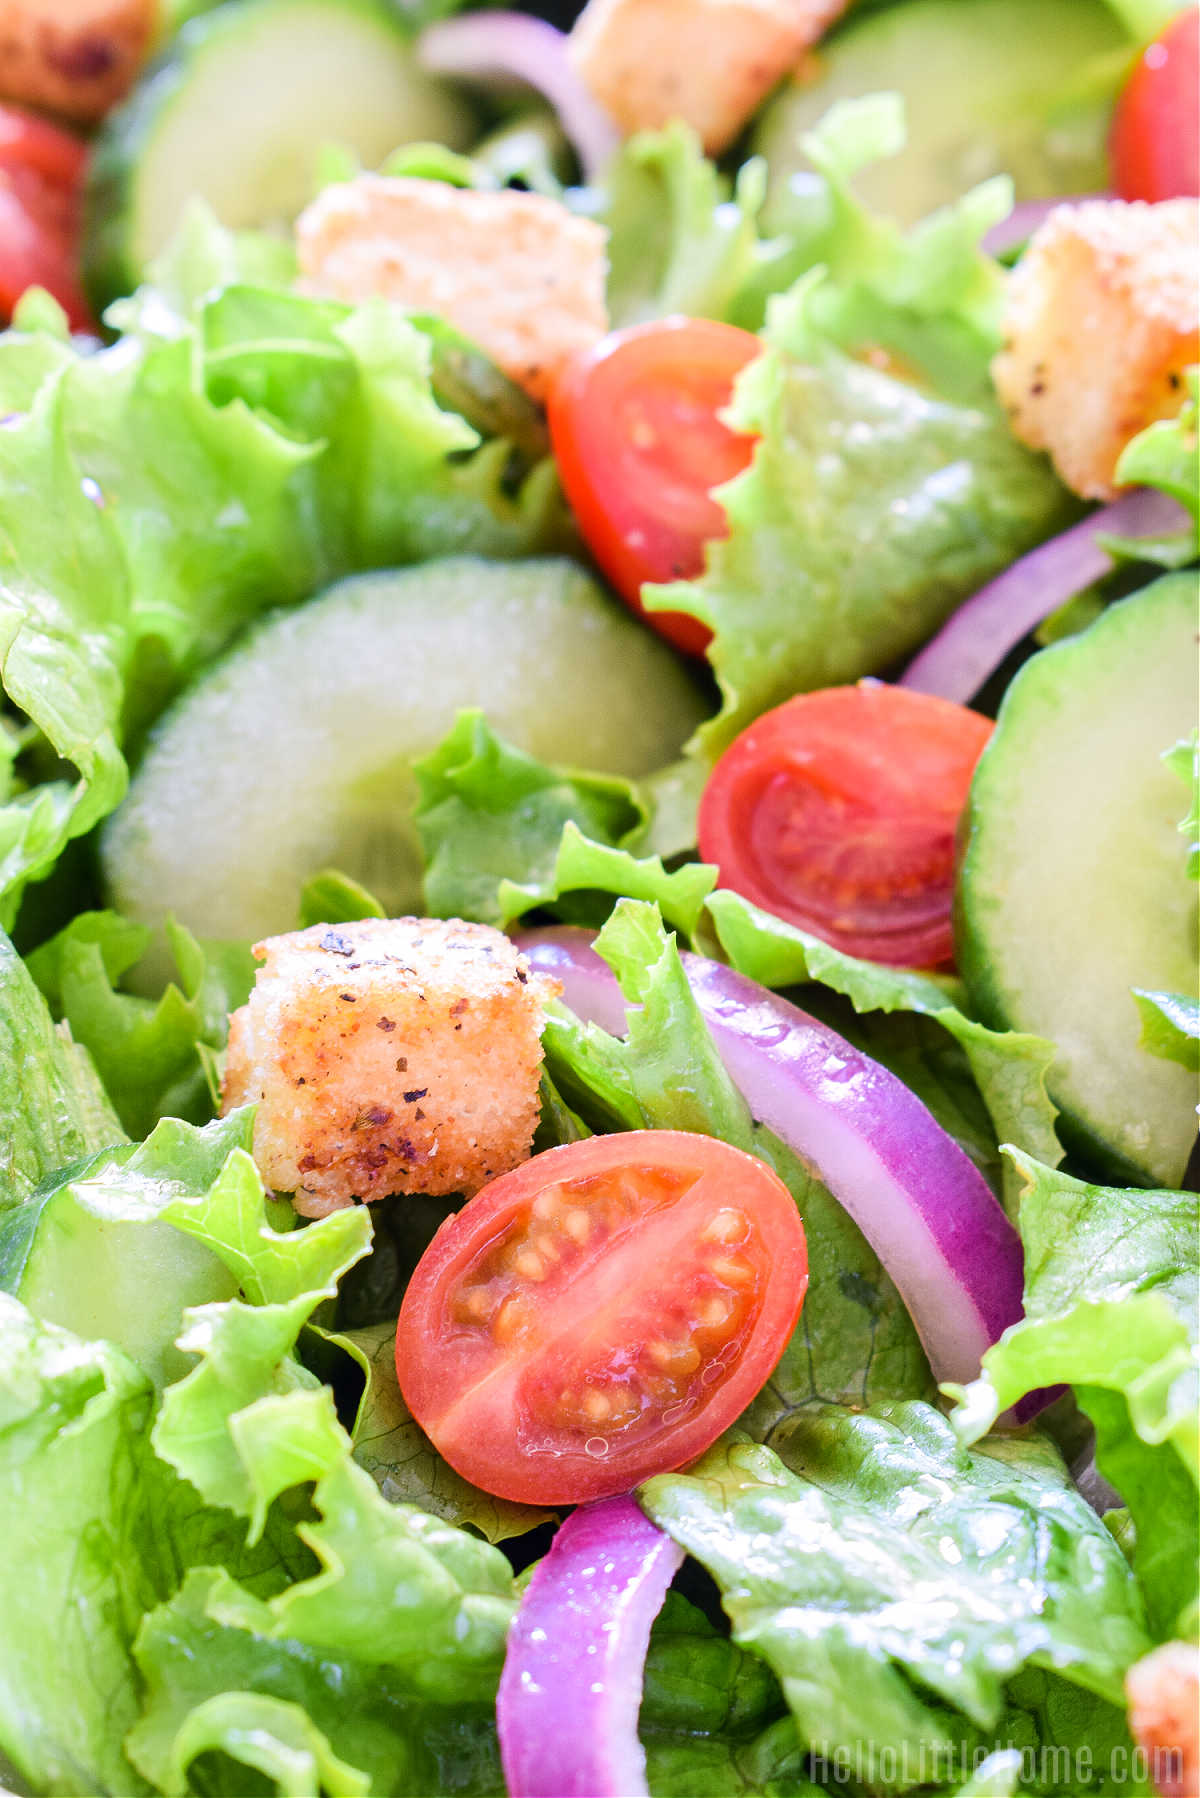 Closeup of the finished salad topped with tomatoes, cucumber, red onions, and croutons.